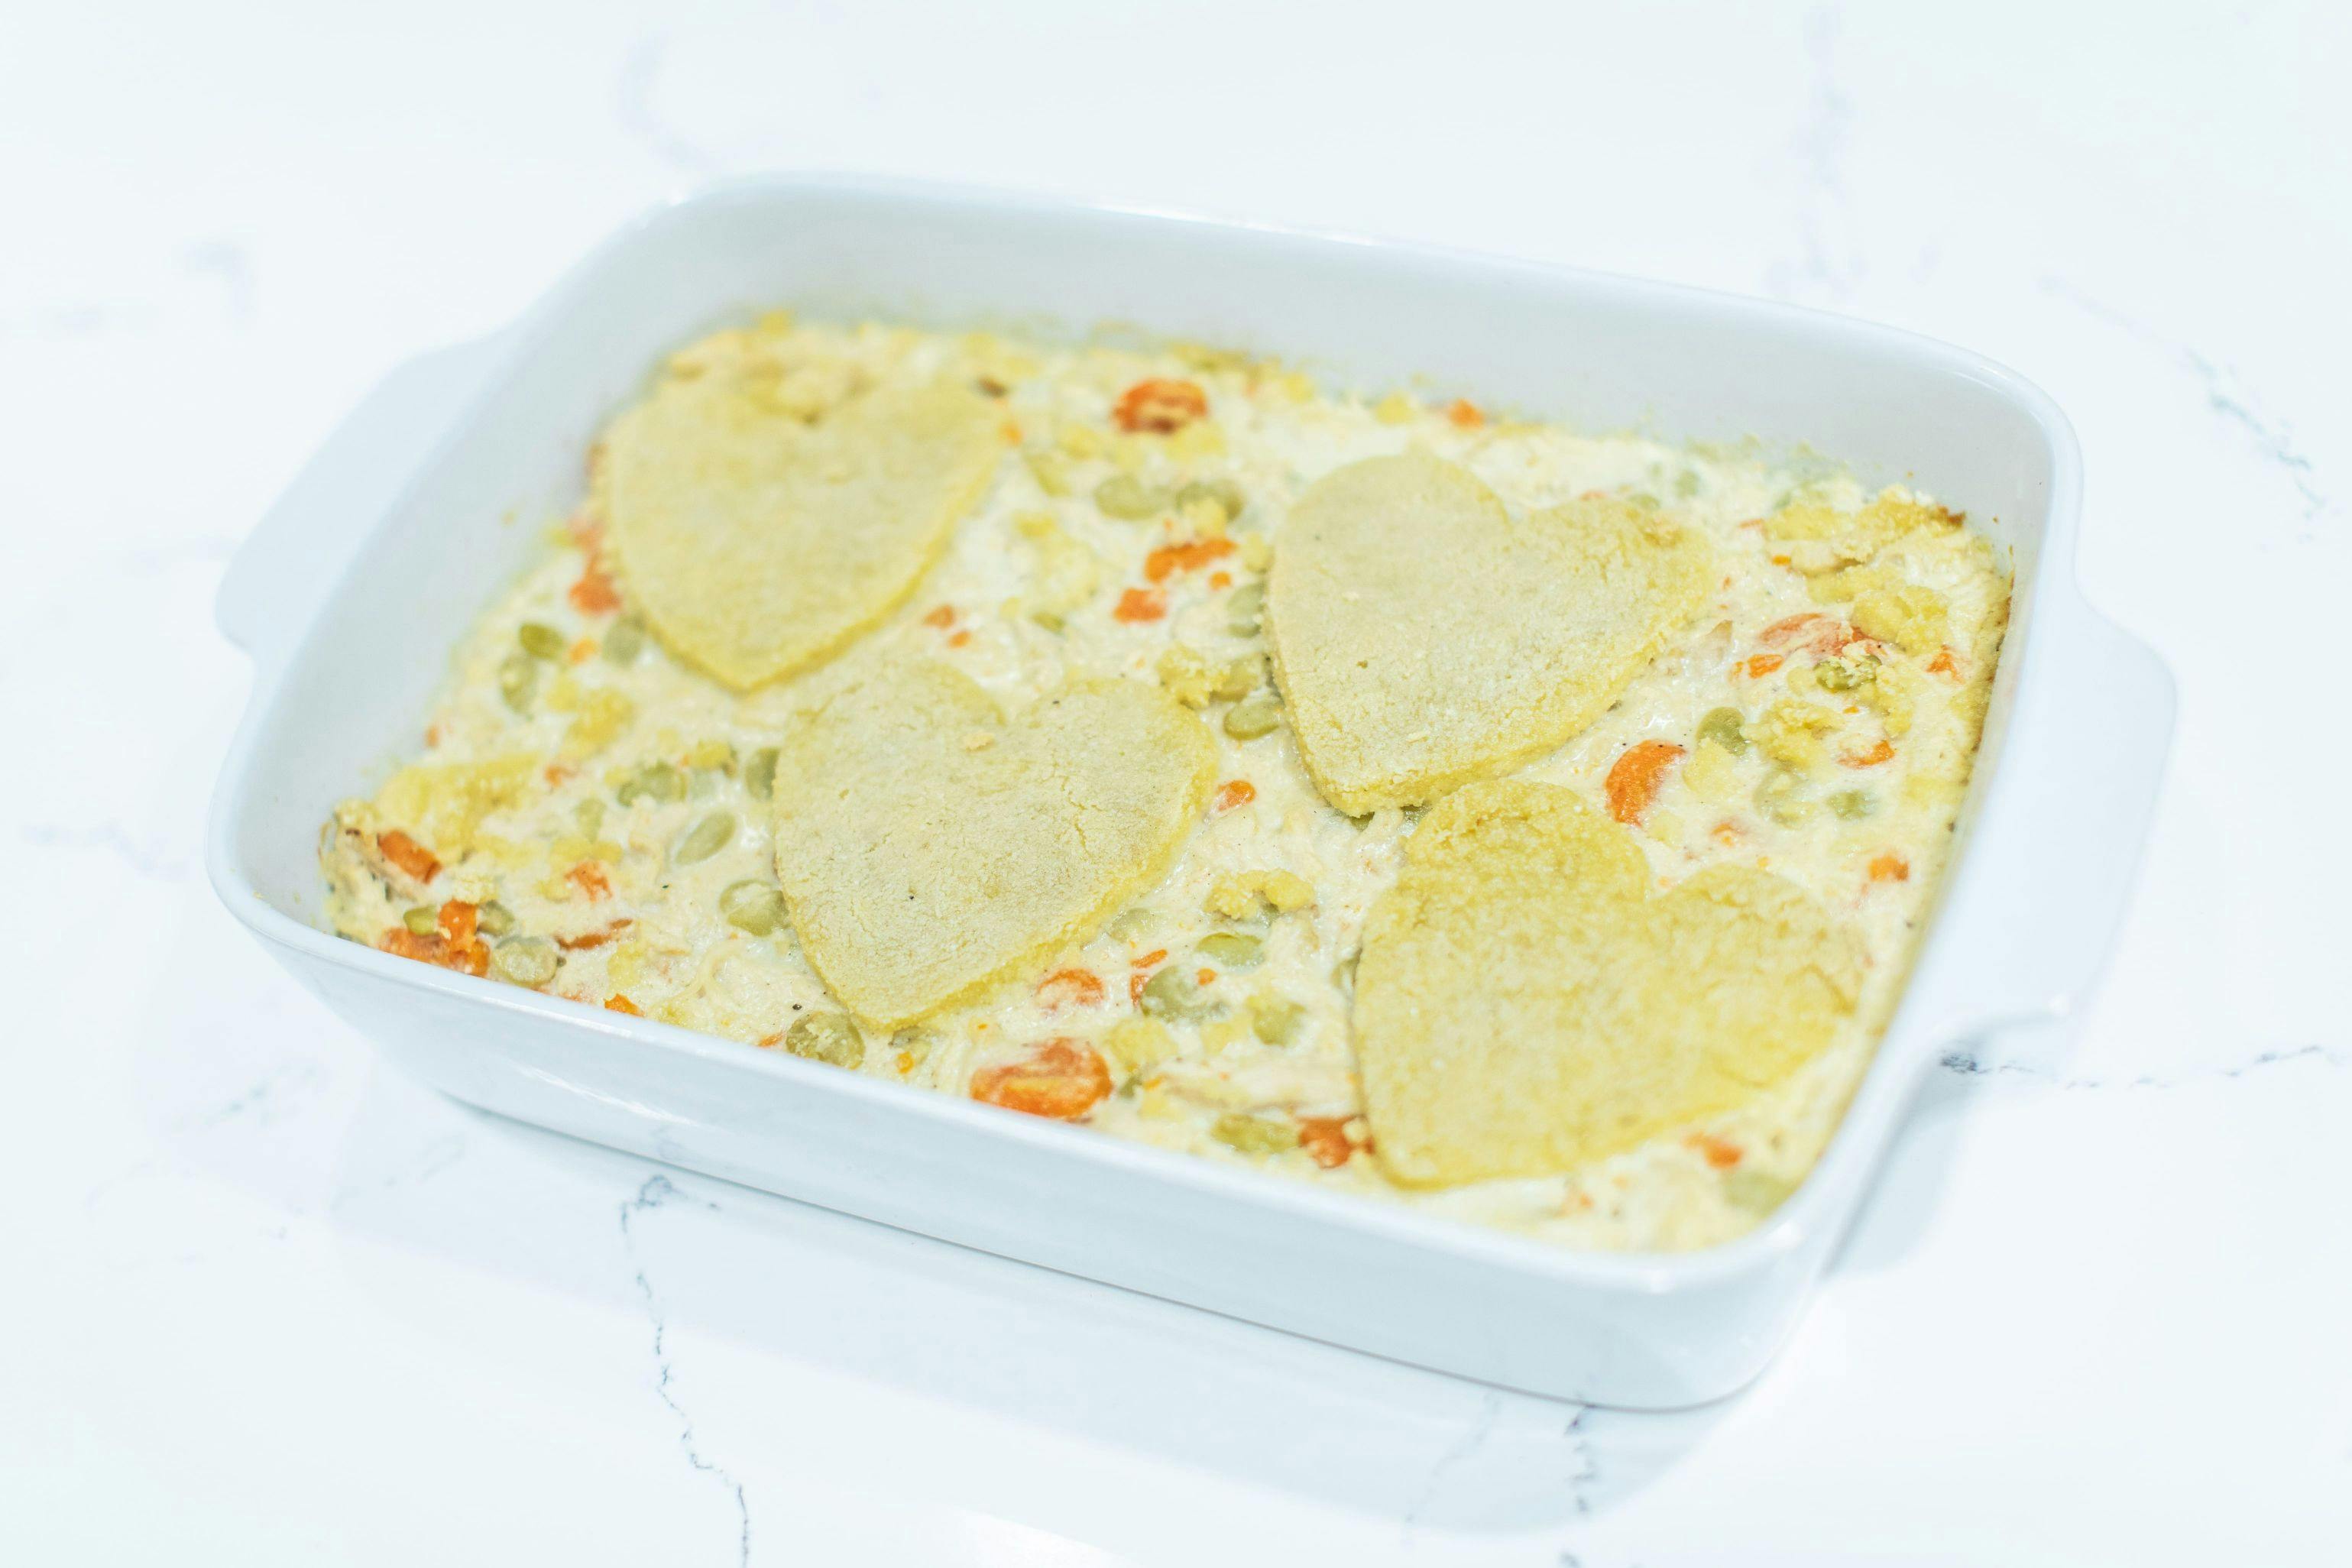 The Holly Furtick recipe: 'Low Carb Chicken Pot Pie'